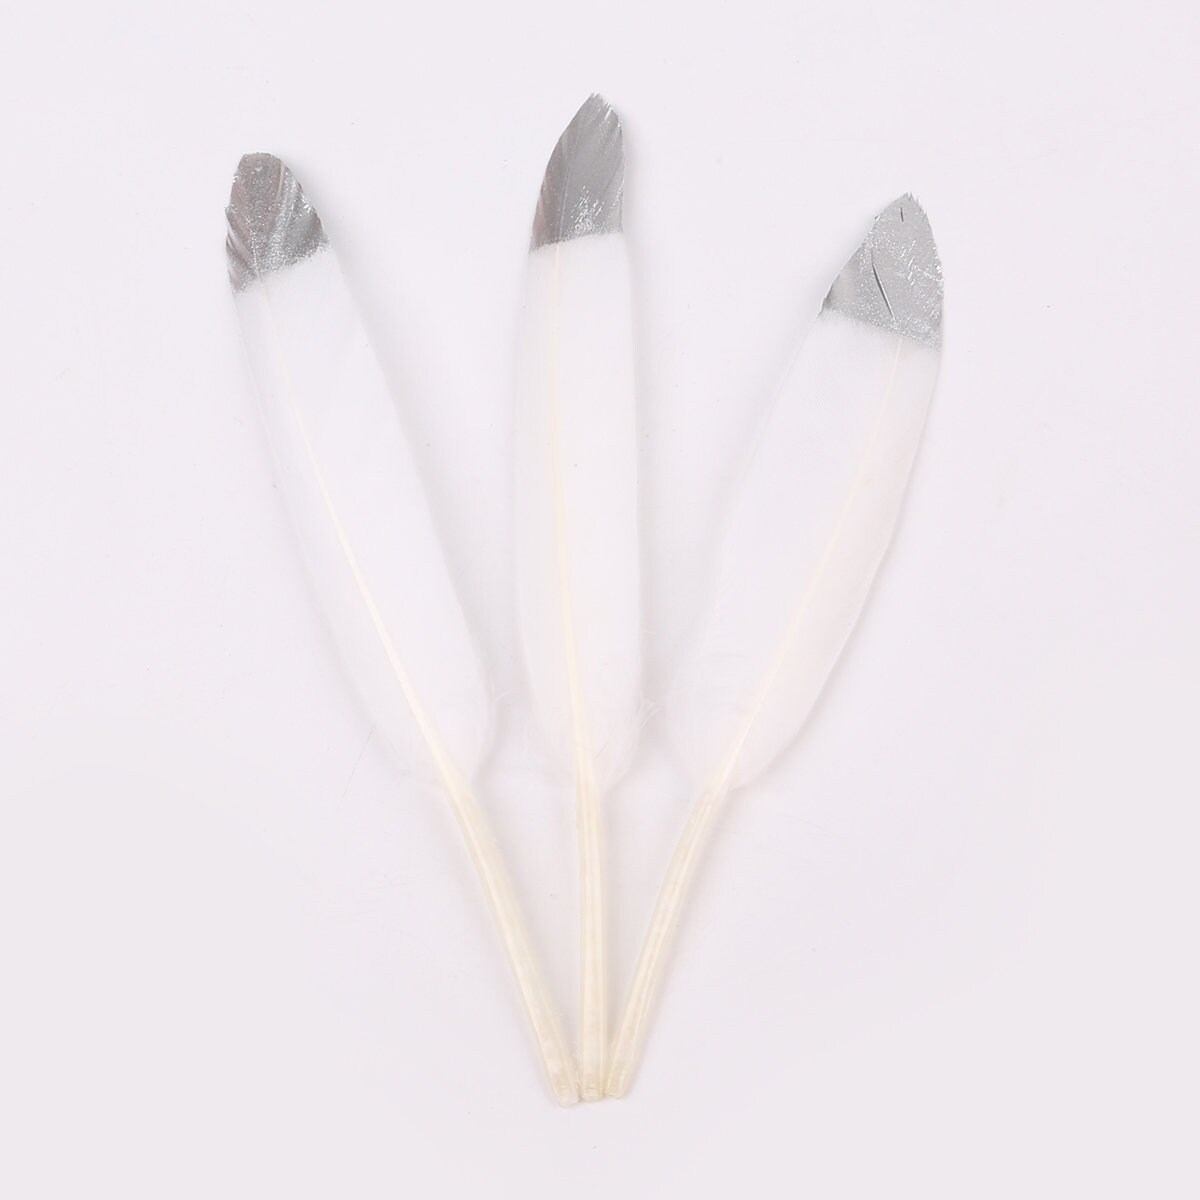 Large Feathers, 10 Pieces 18-24 White Prime Grade Large Ostrich Wing Plumes  Centerpiece Feathers : 2224 